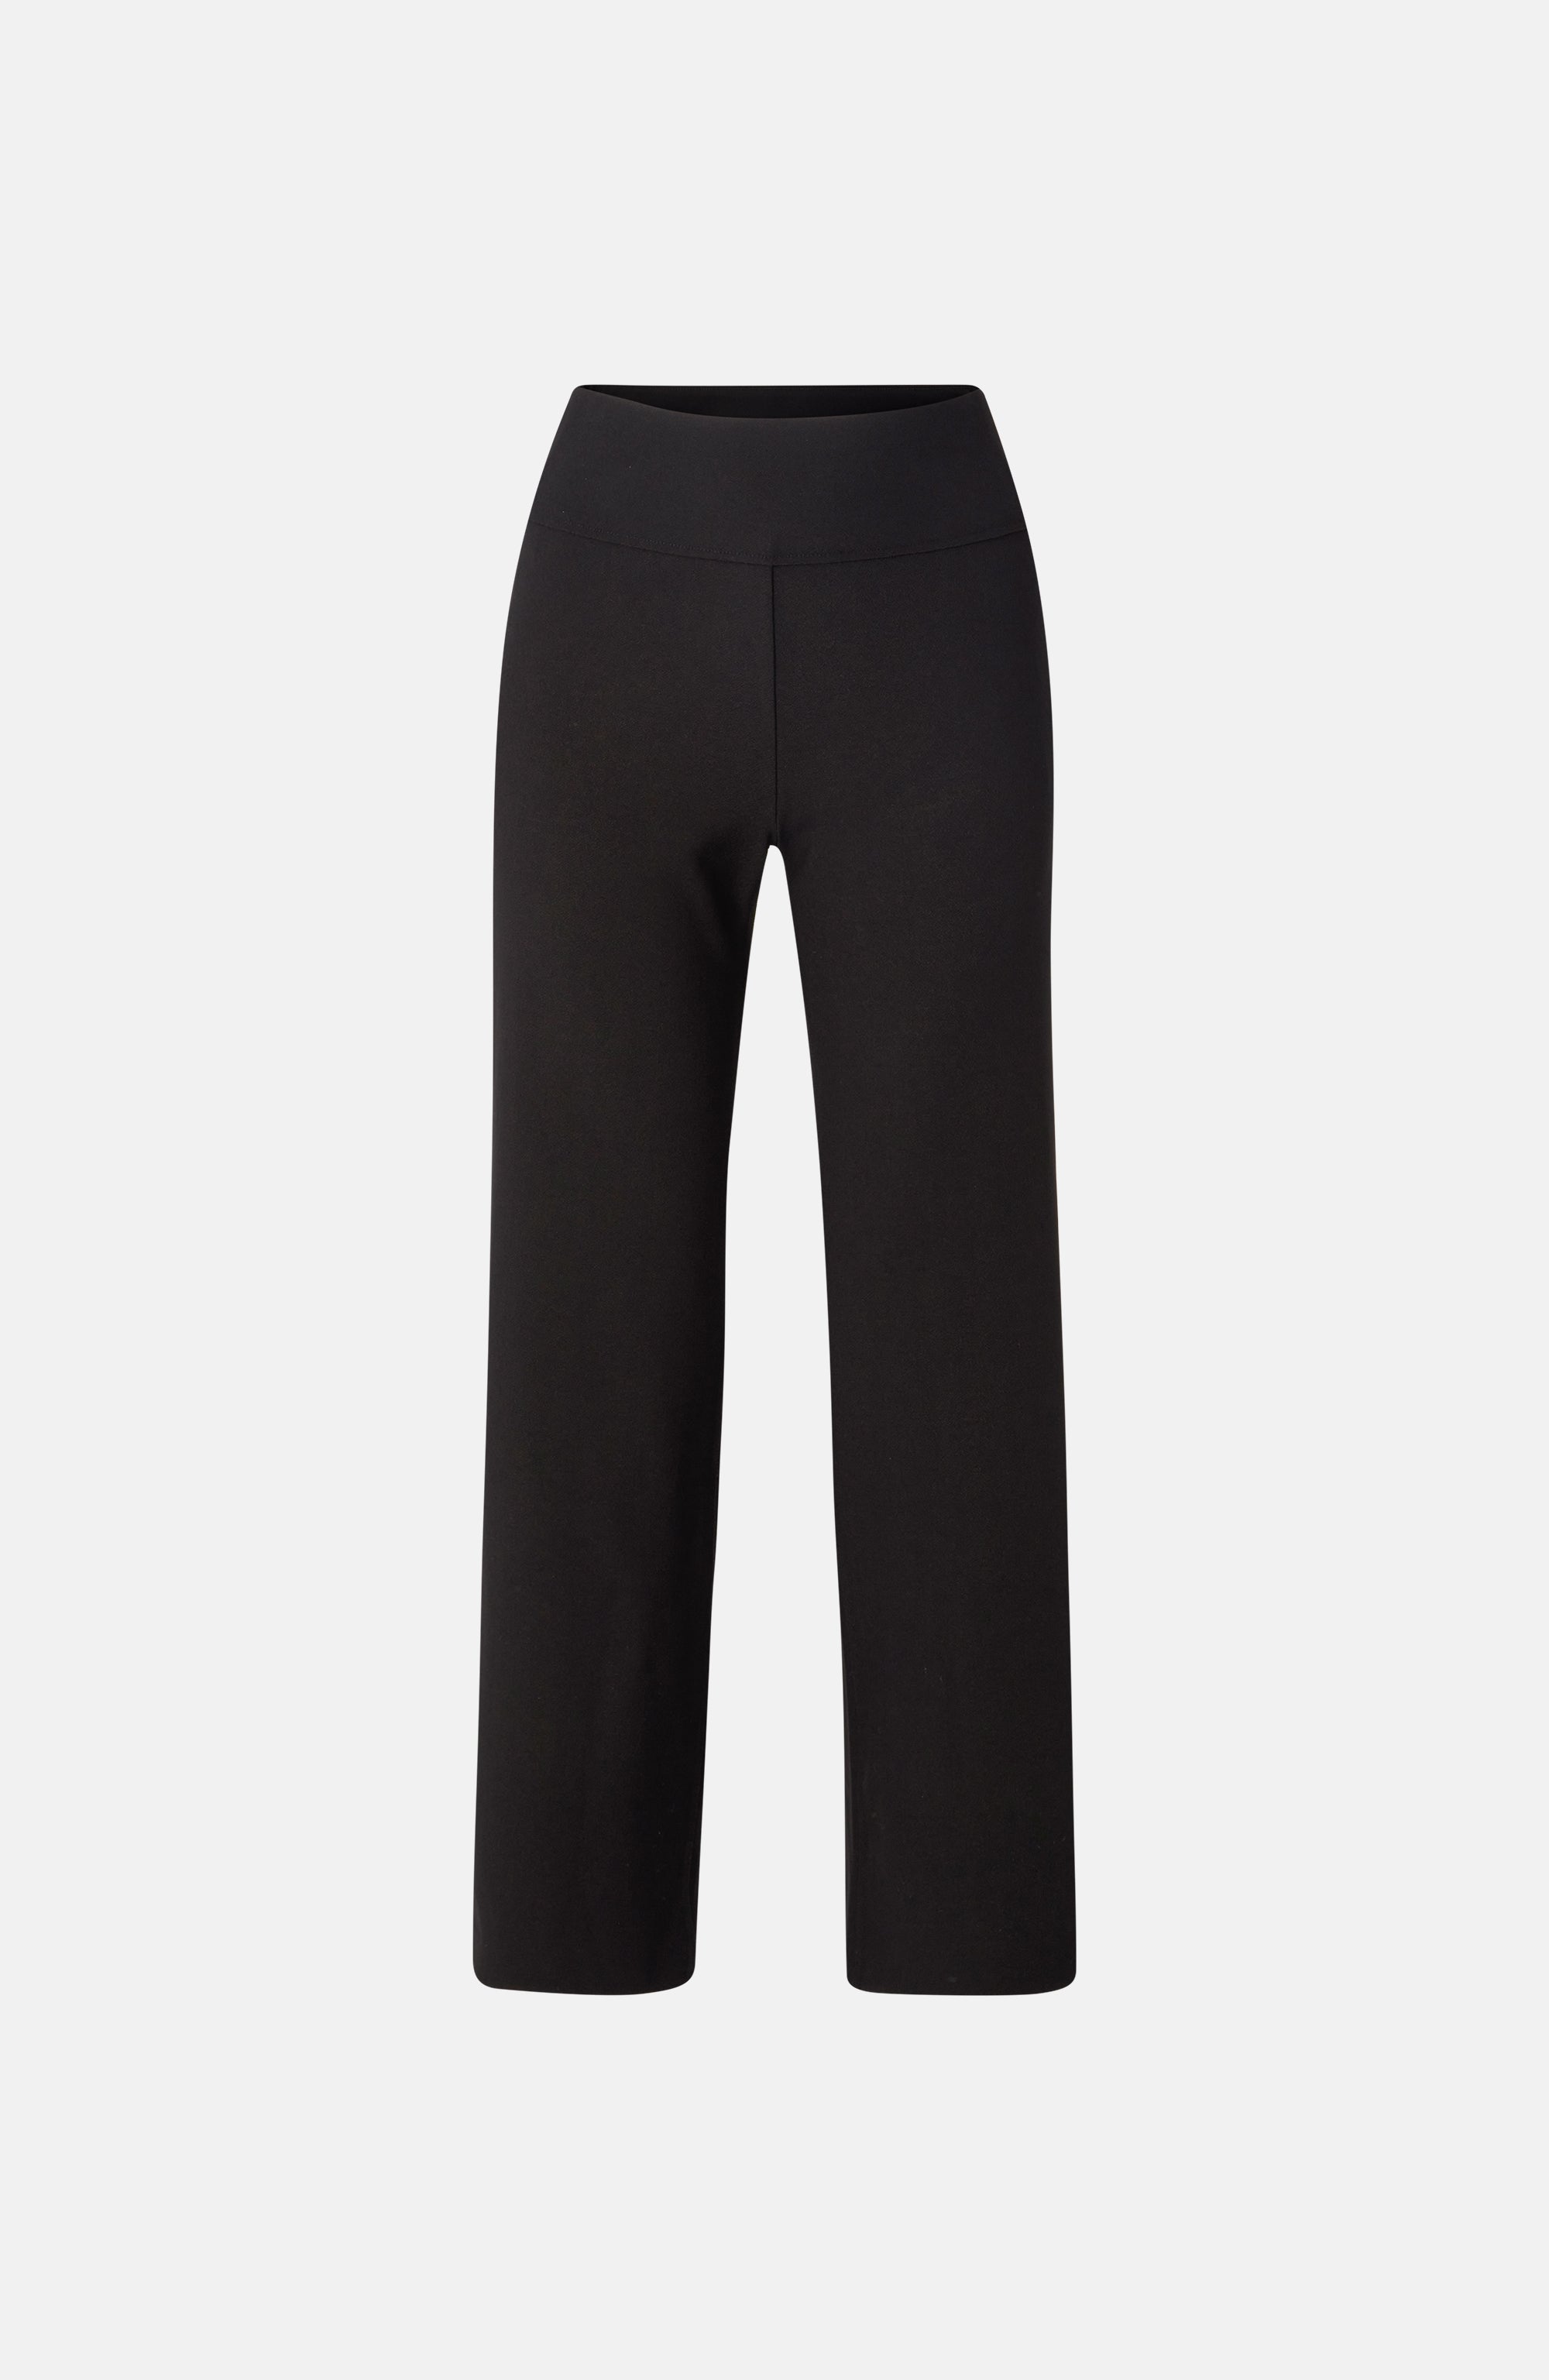 Angie Short Trousers – Marville Road